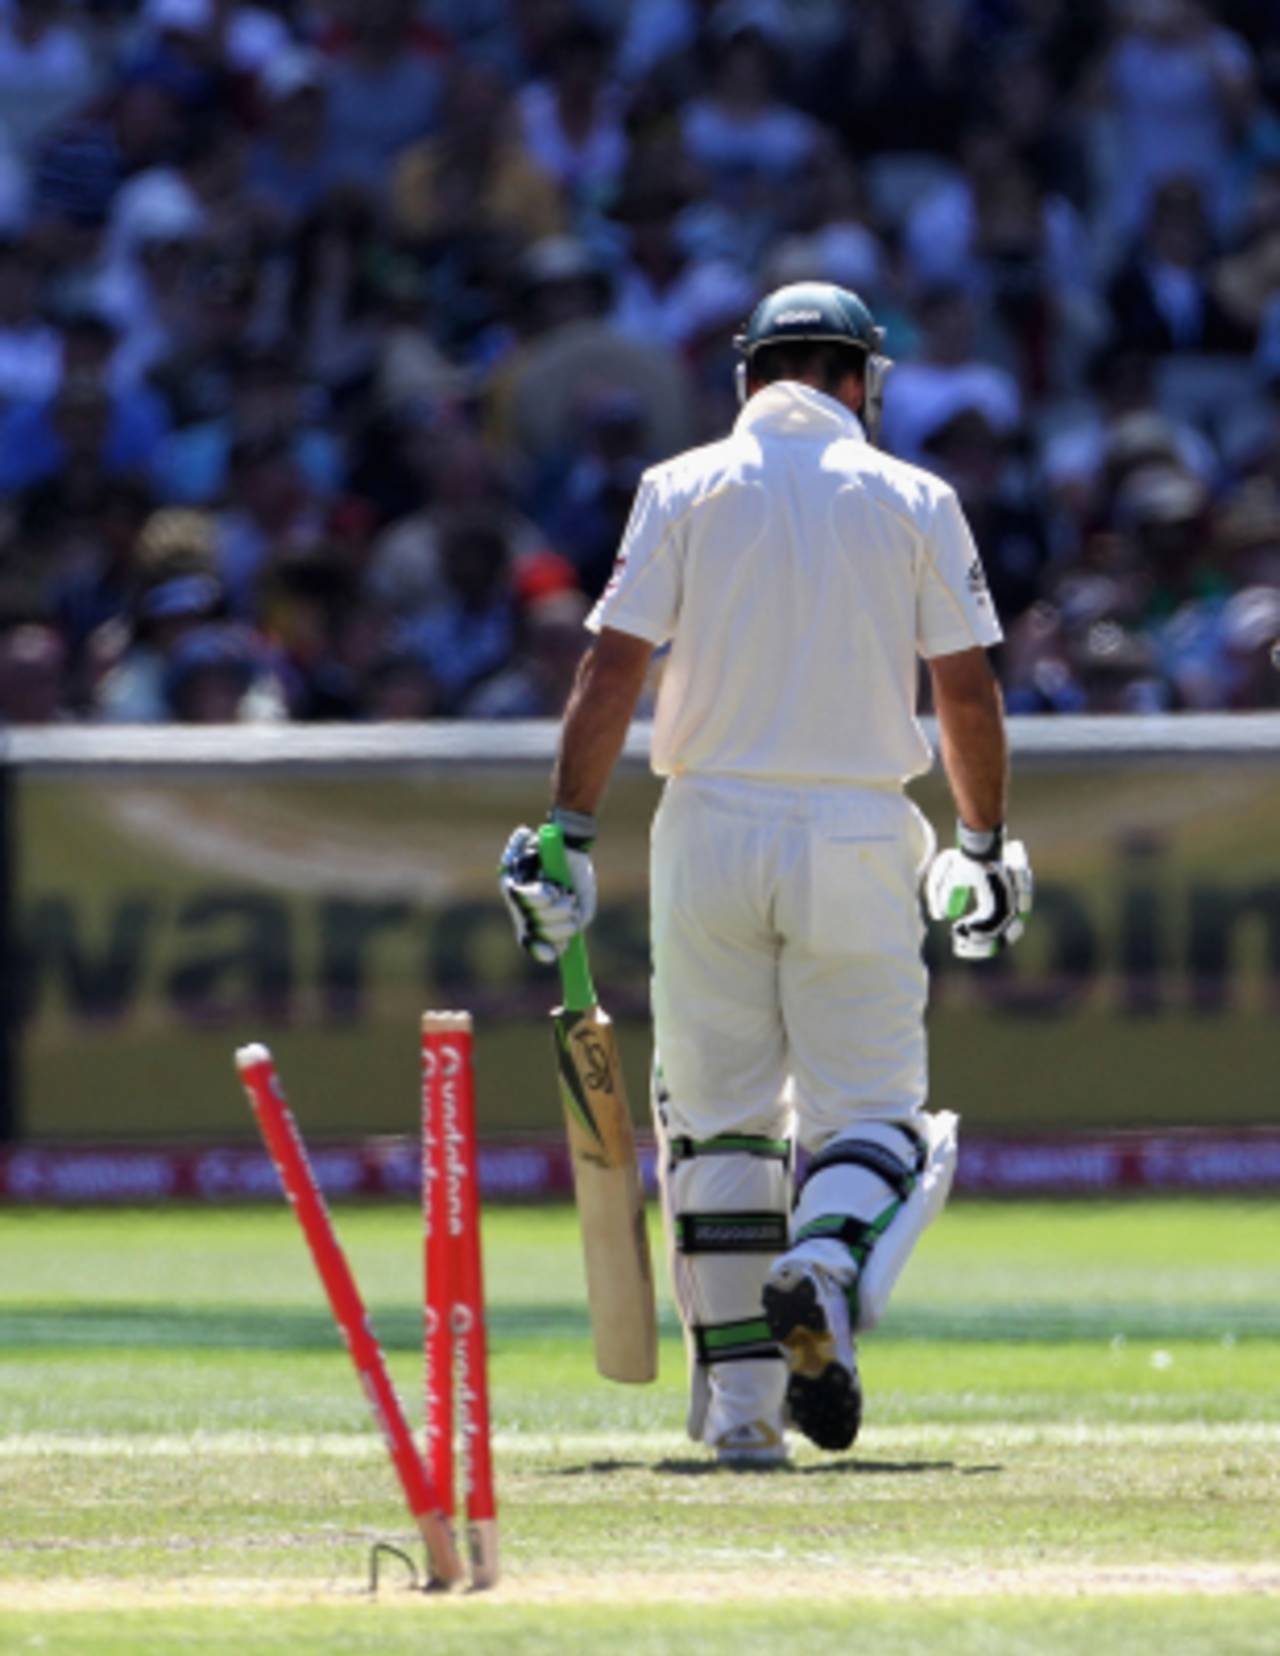 Ricky Ponting leaves the field after being bowled by Tim Bresnan, Australia v England, 4th Test, Melbourne, 3rd day, December 28, 2010